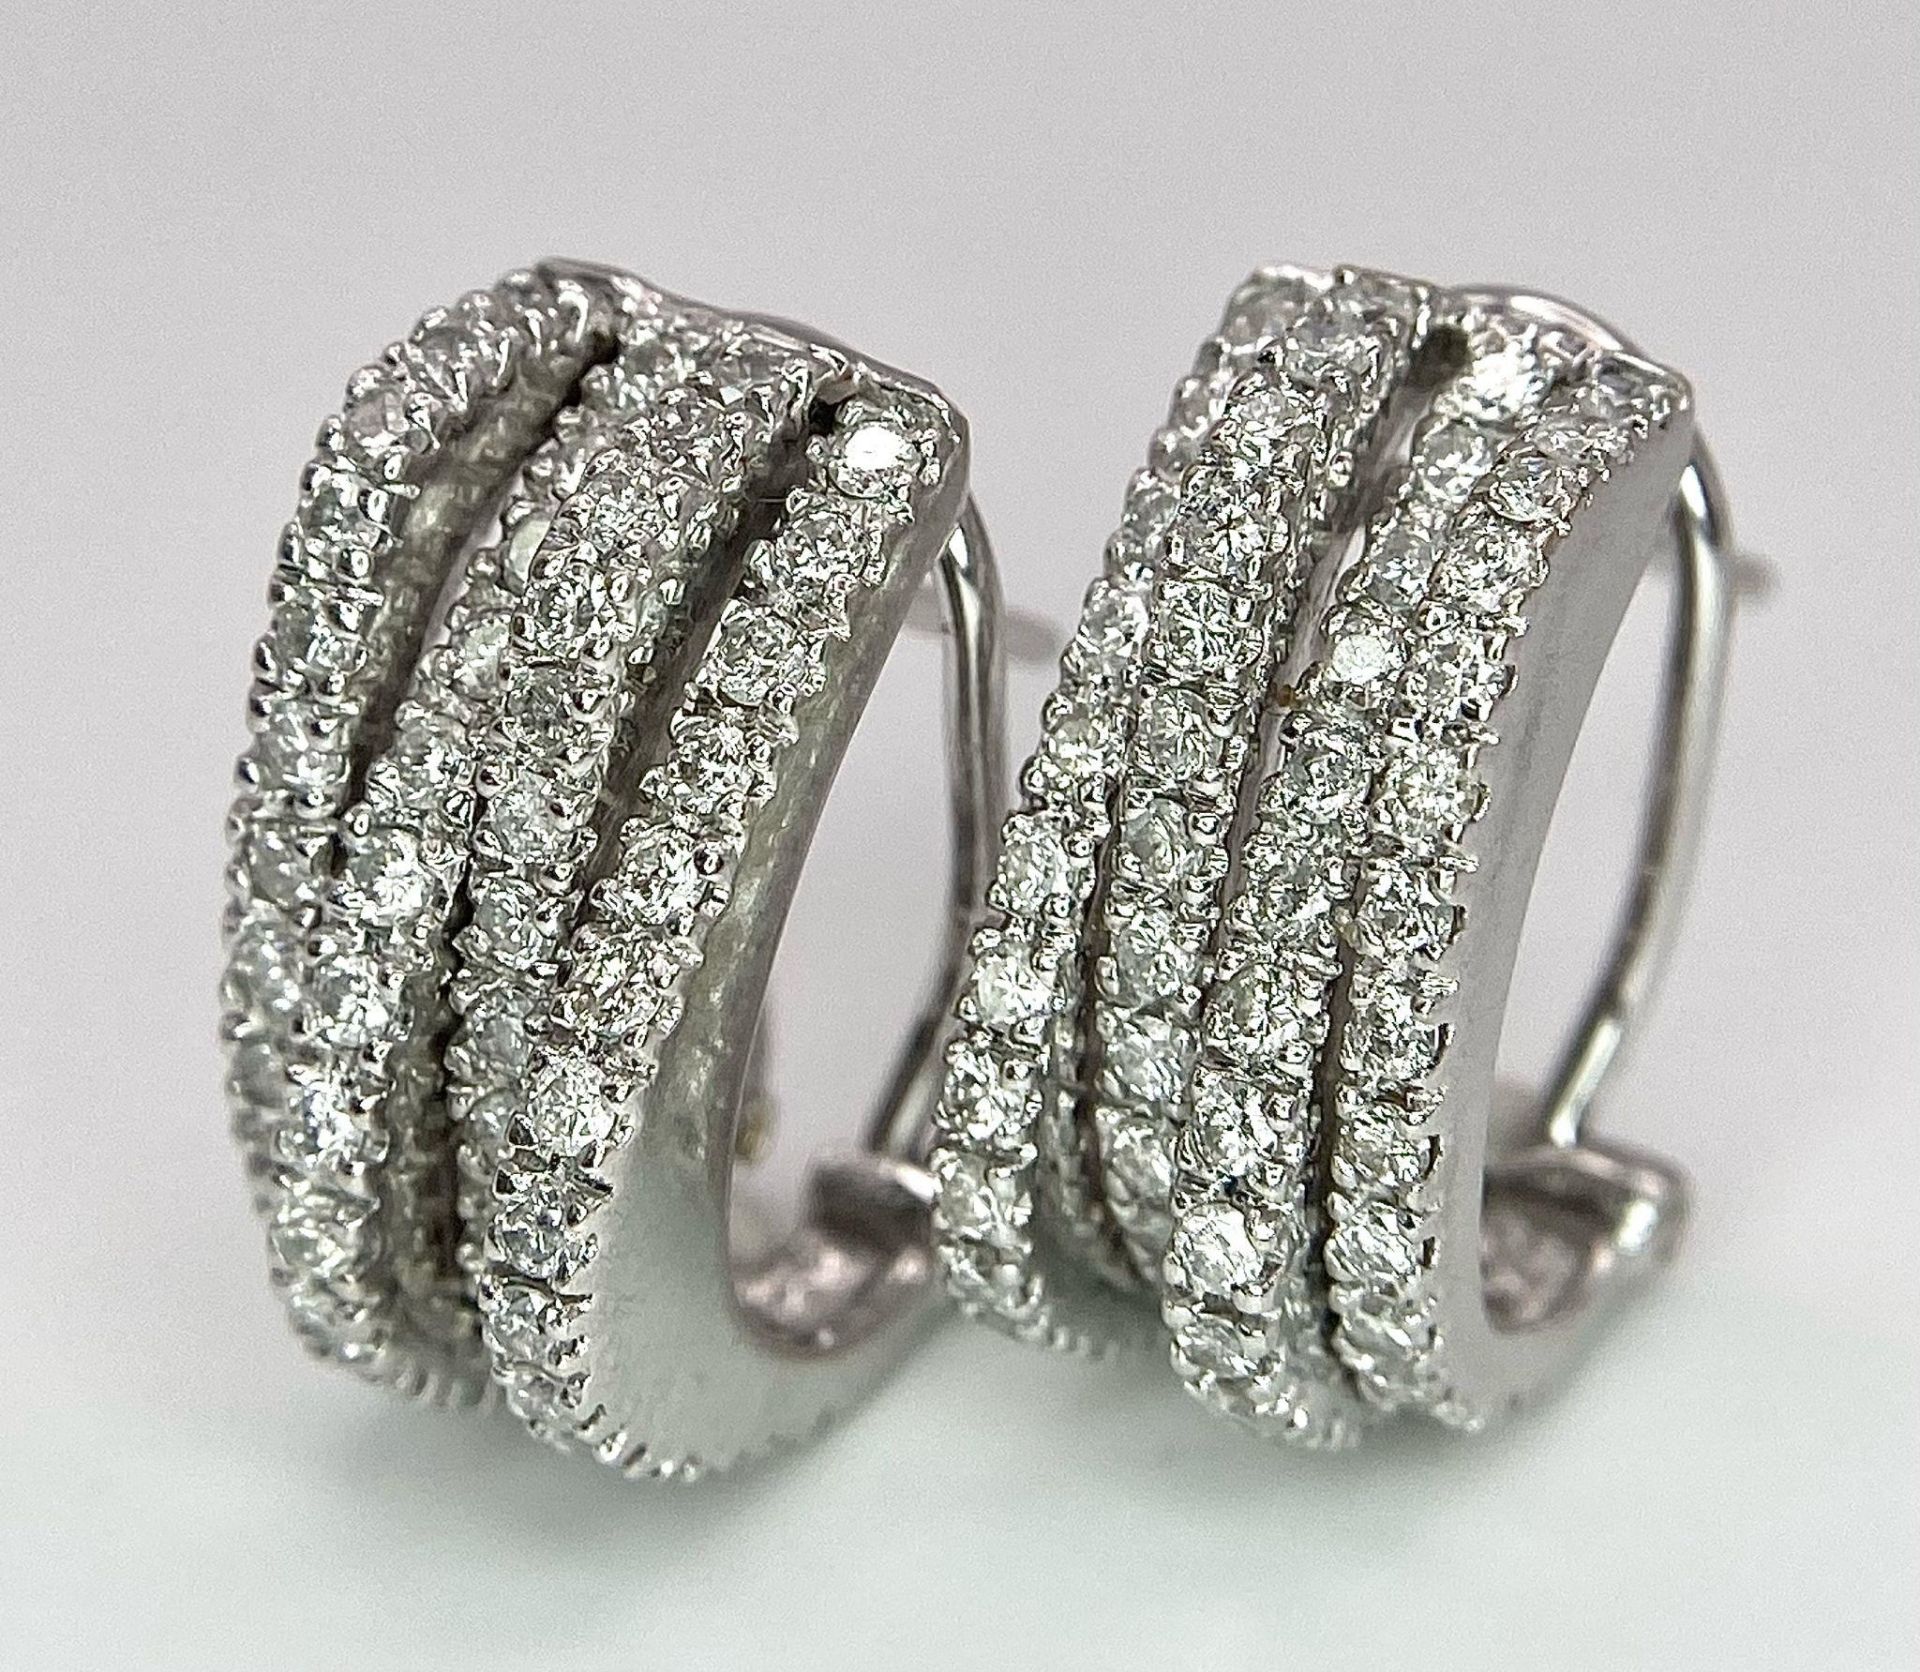 A PAIR OF 18K WHITE GOLD DIAMOND EARRINGS. TOTAL WEIGHT 9.8G